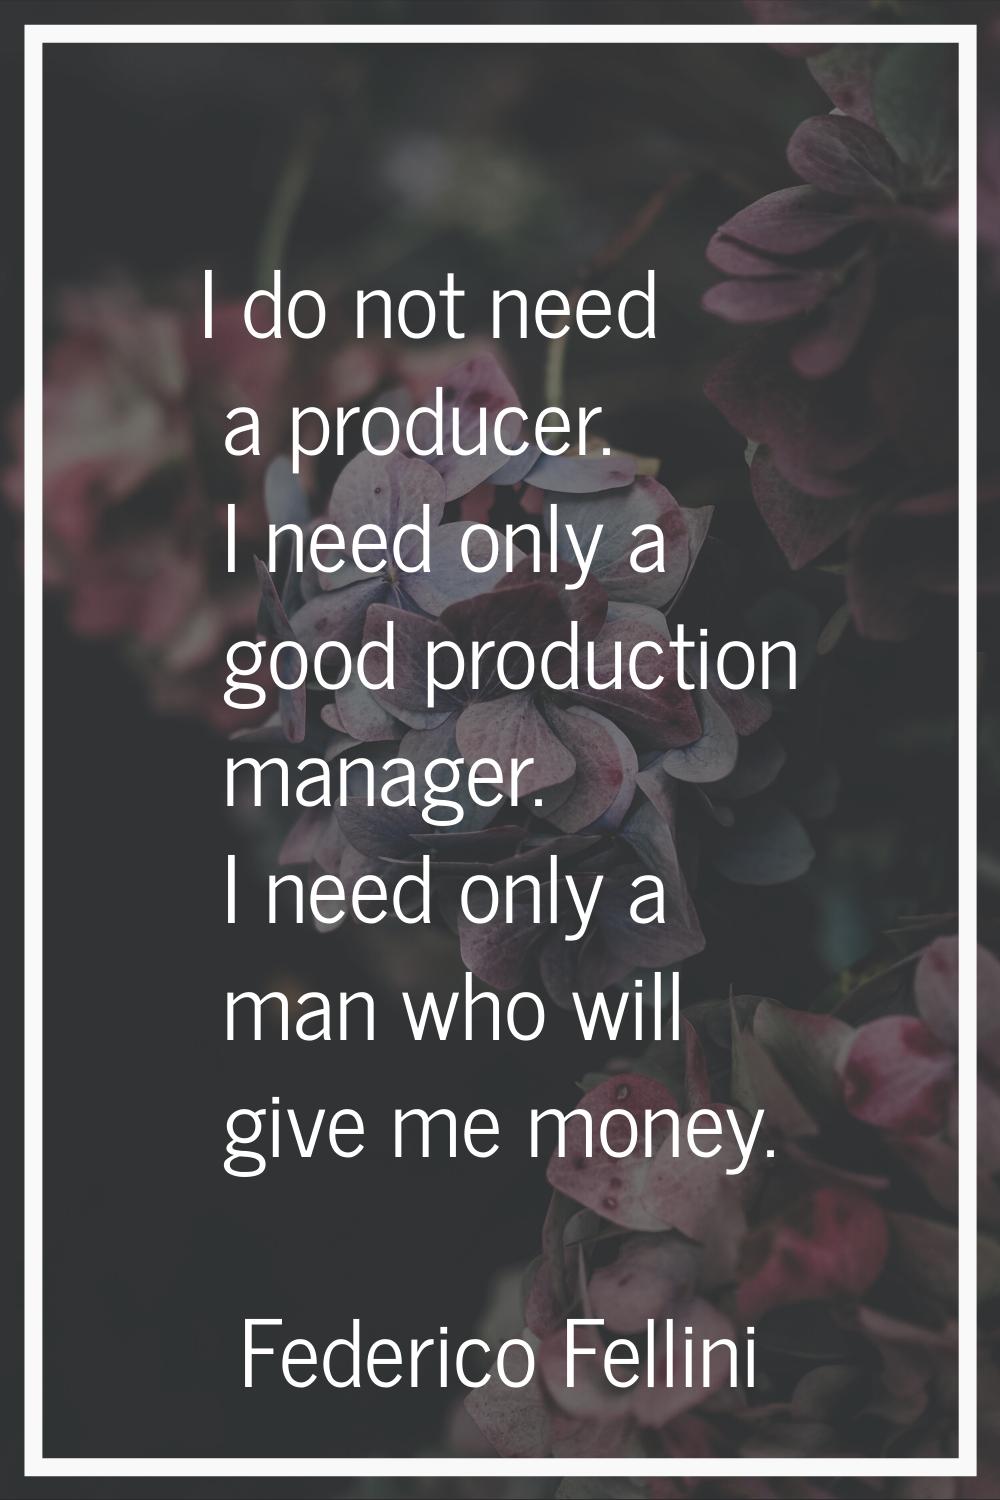 I do not need a producer. I need only a good production manager. I need only a man who will give me